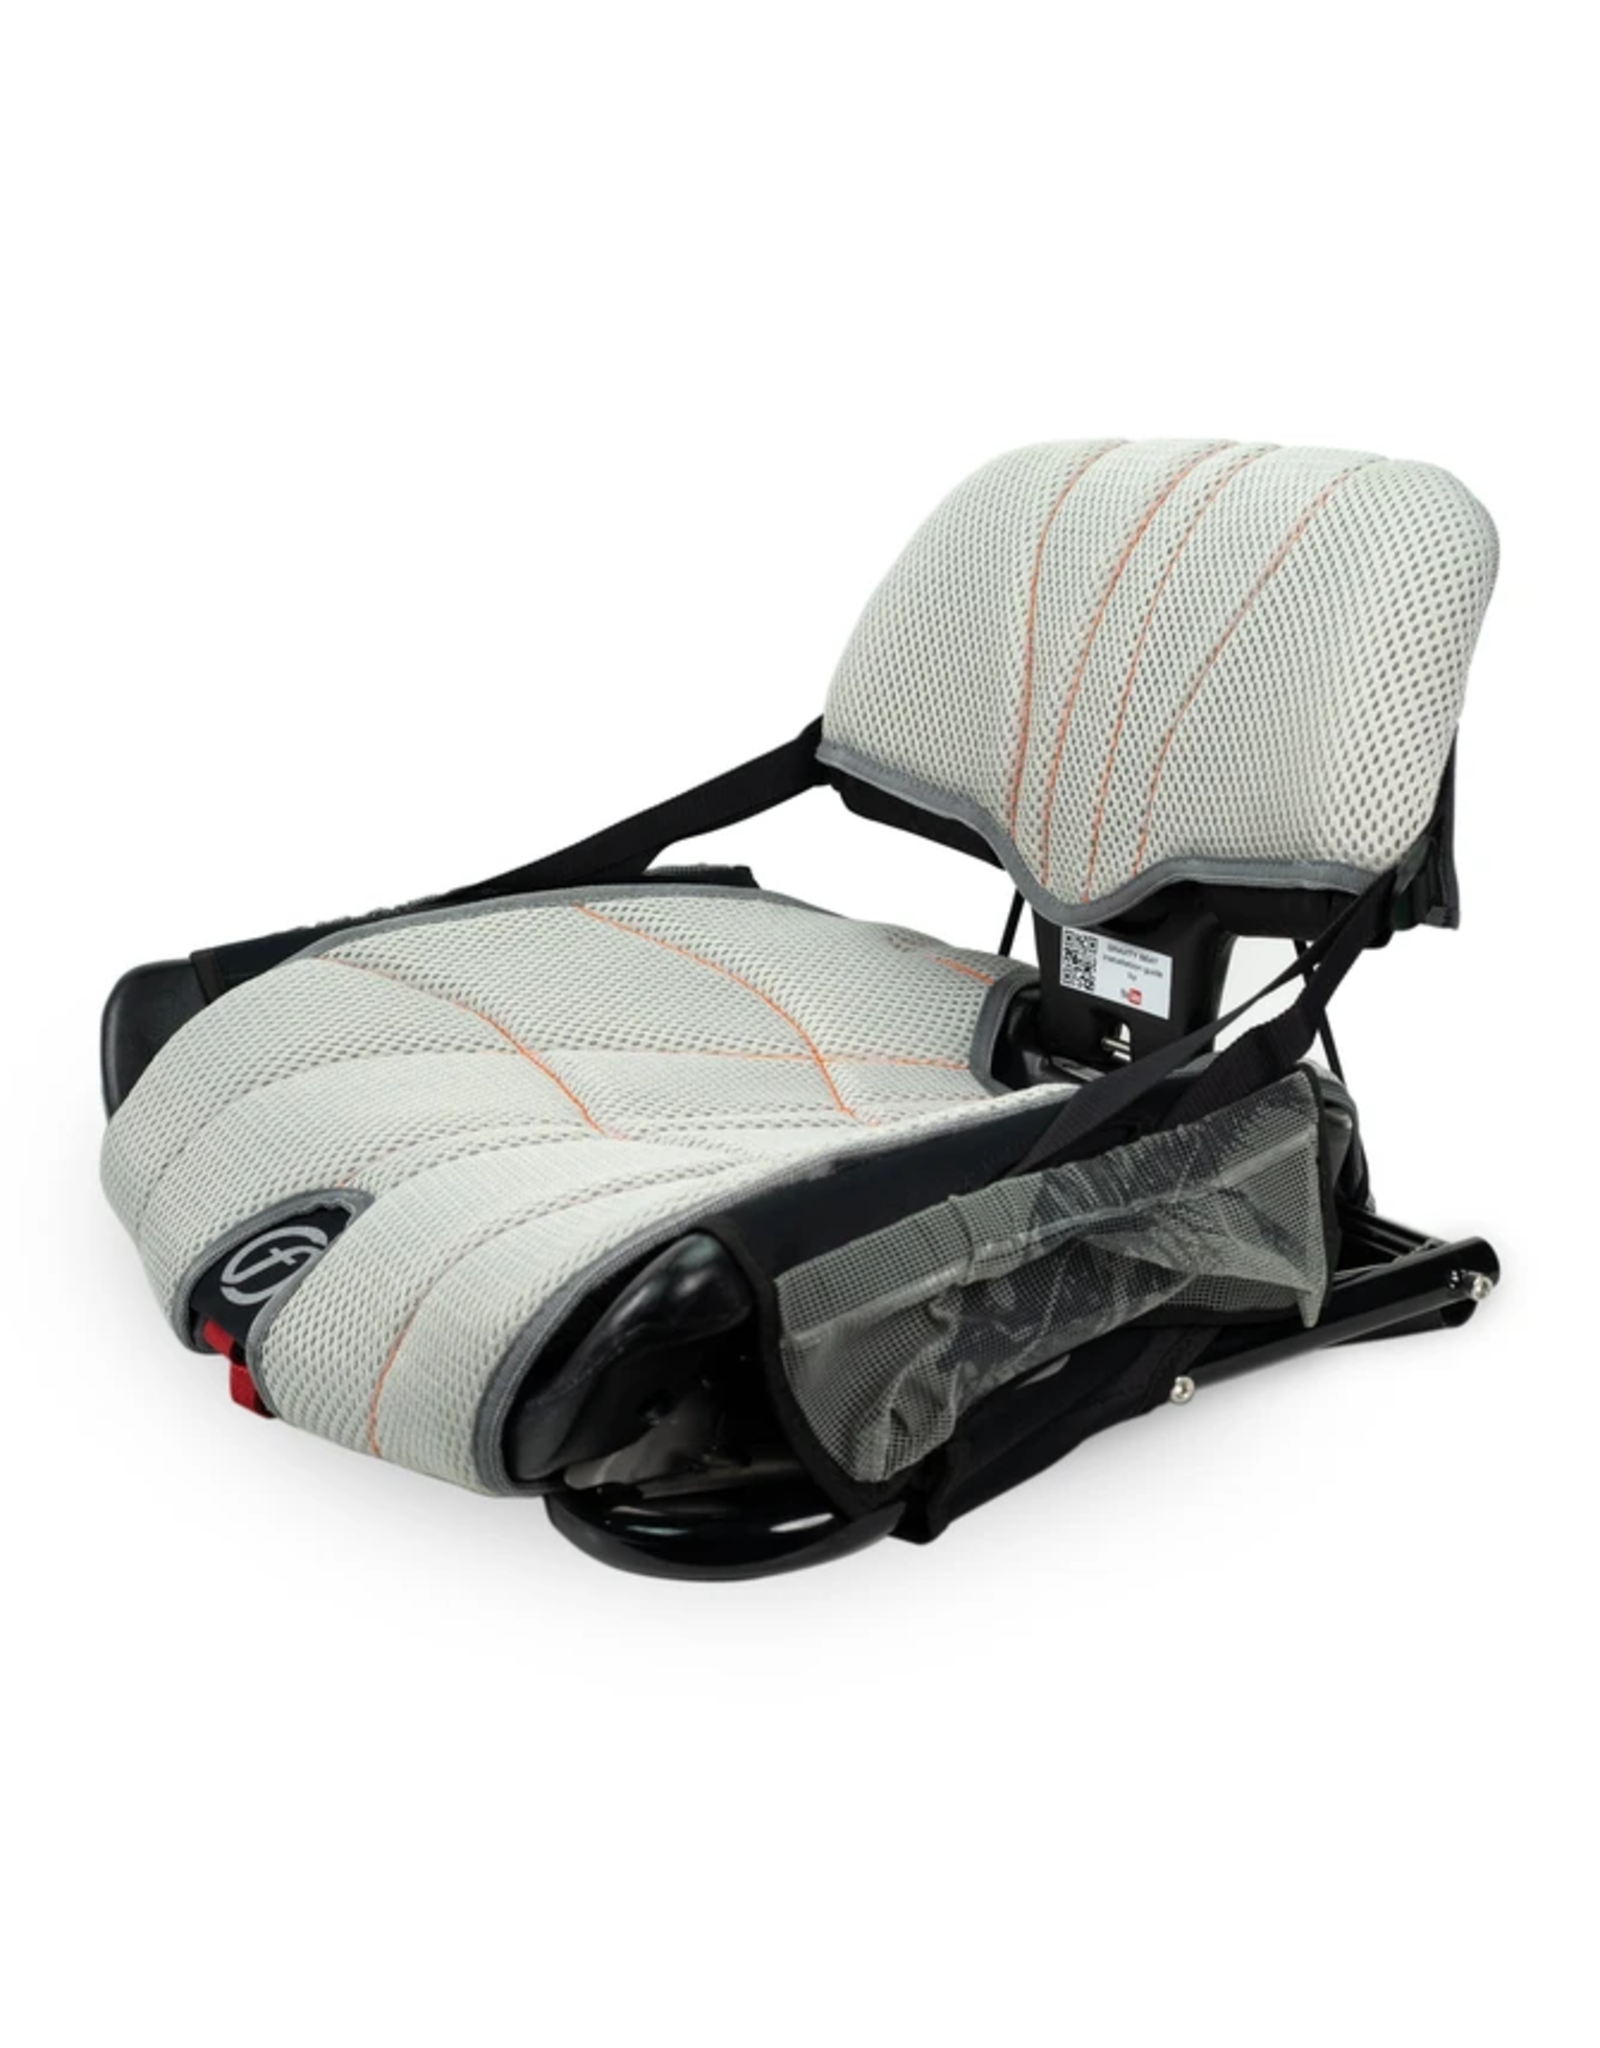 Feelfree Kayaks Feelfree Acc. Siège Gravity Seat remplacement